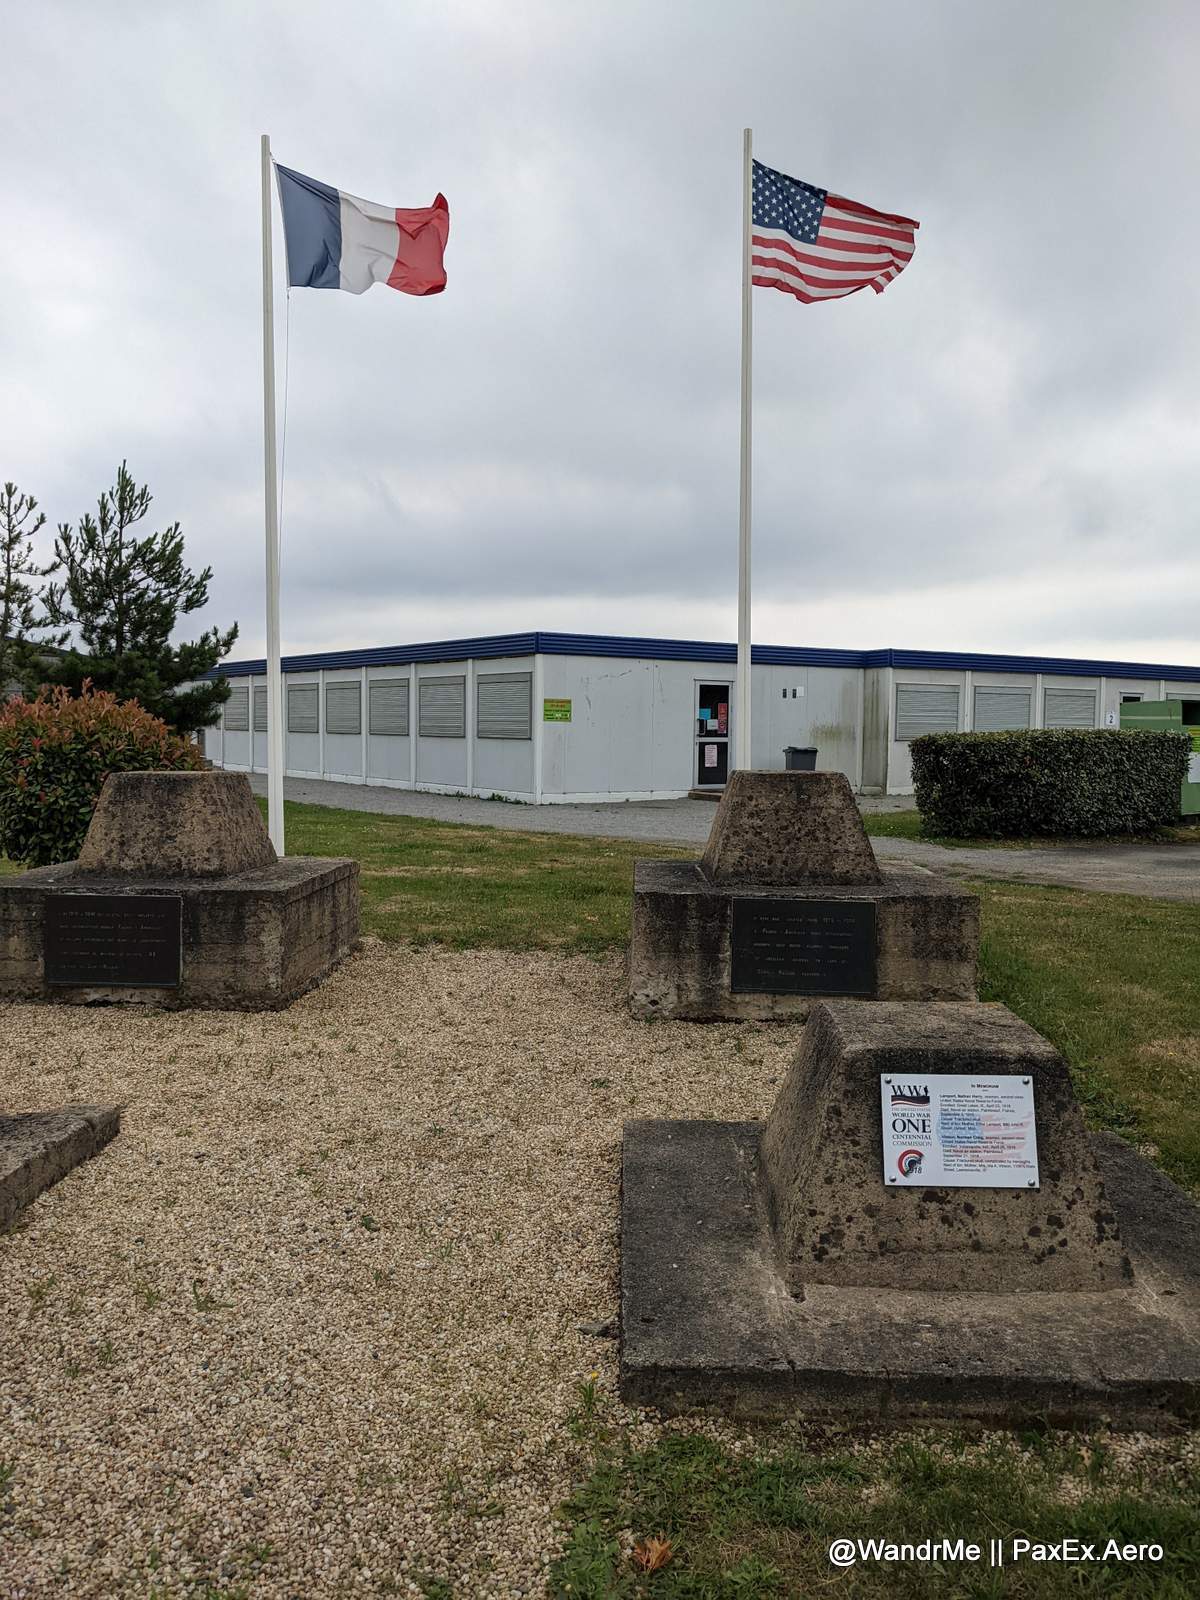 US and French flags flying at the St Viaud World War I aero-naval memorial